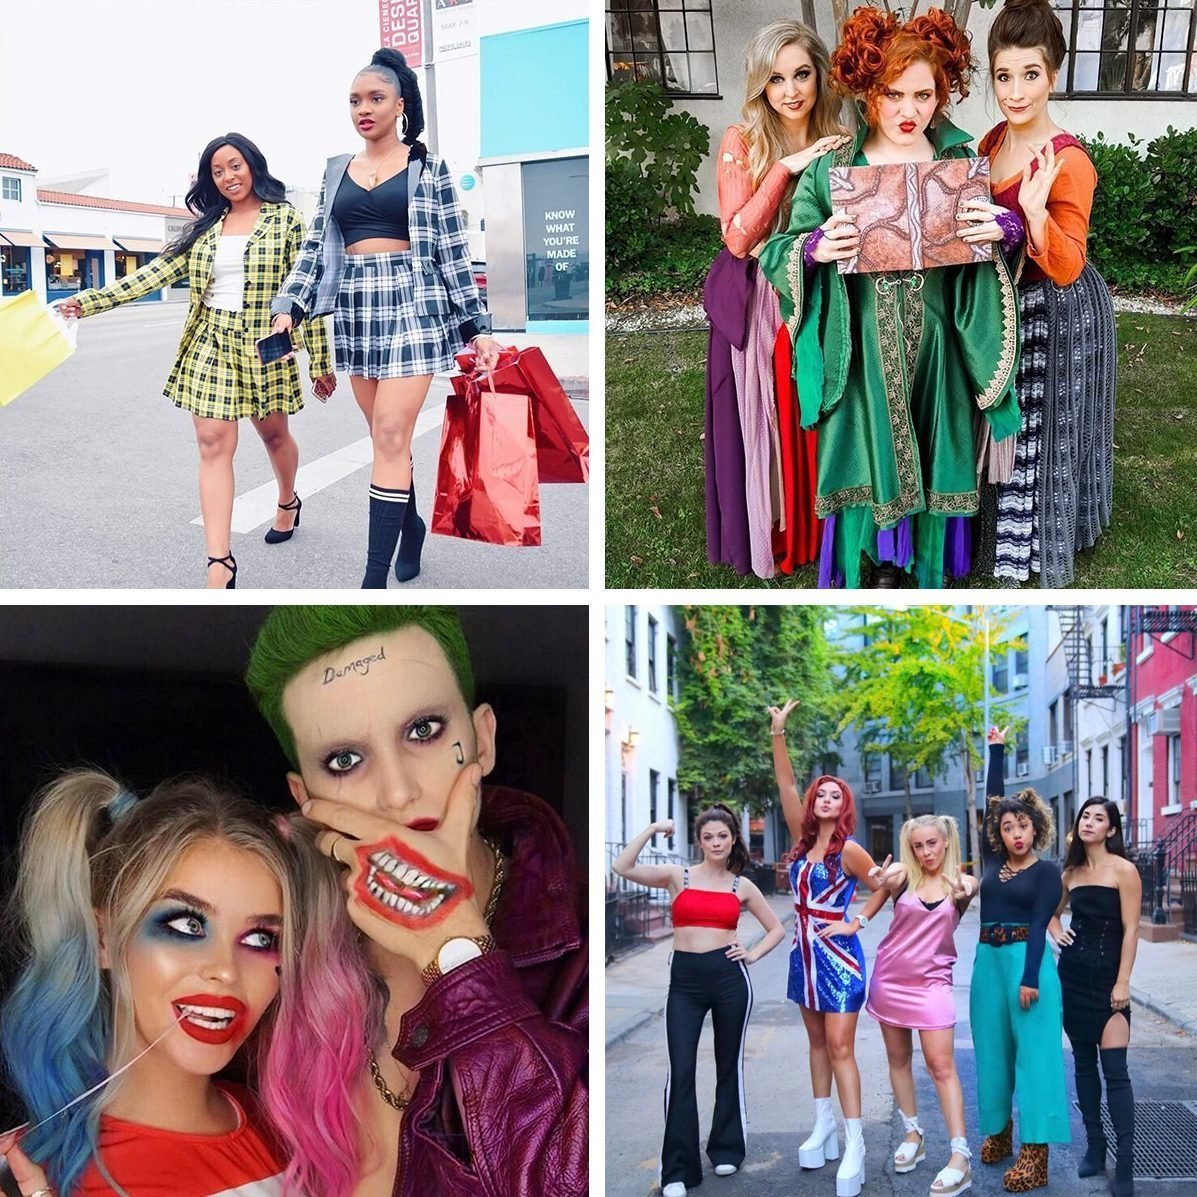 60 Fun Best Friend Halloween Costumes for You and Your Bestie